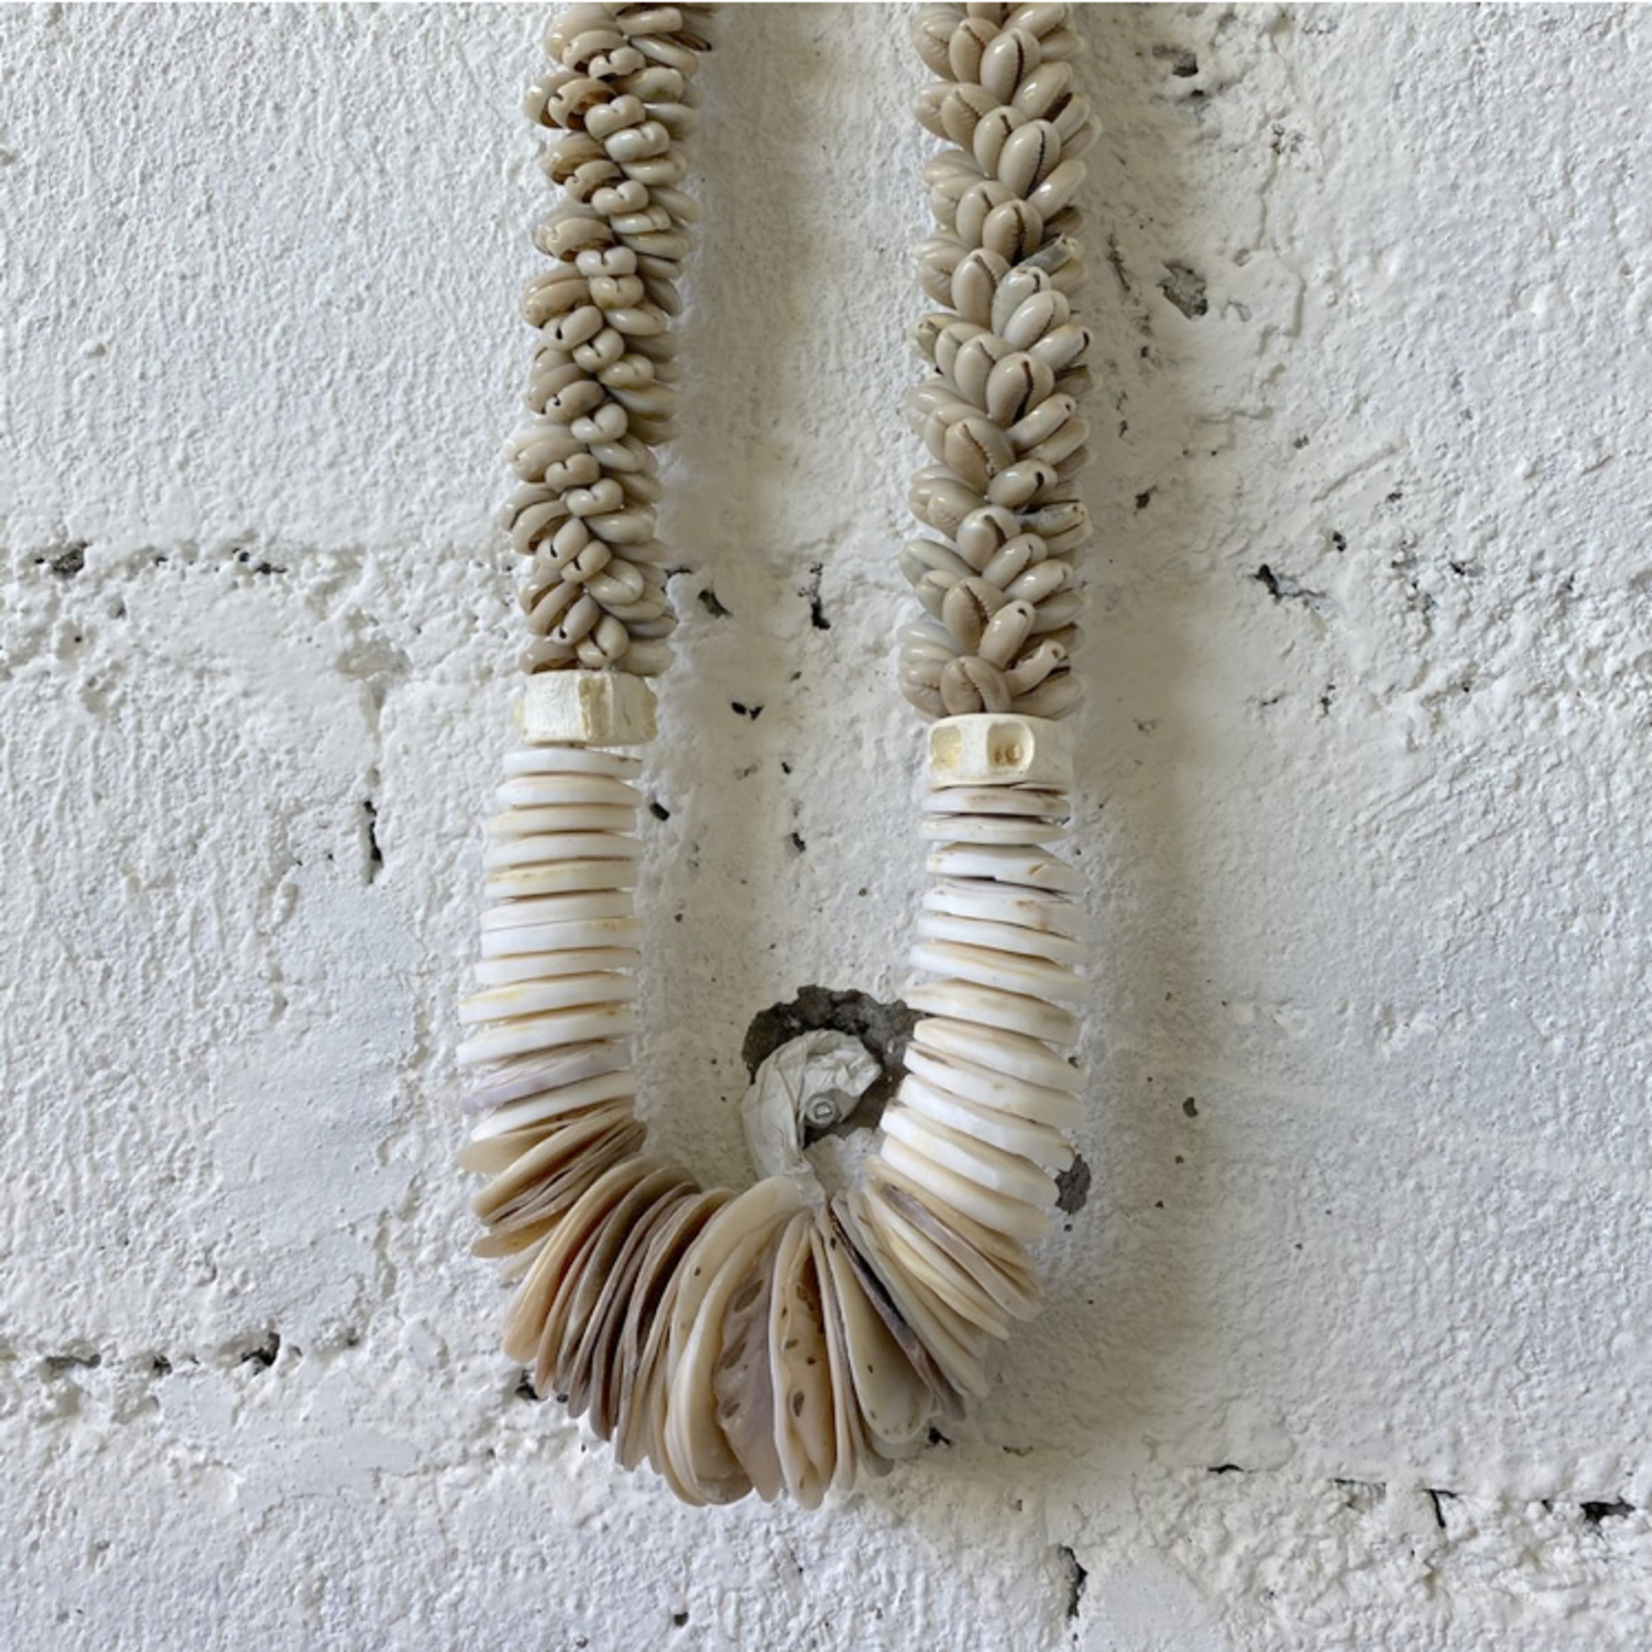 Outside The Box 20" Cypraea & Conus Handcrafted Shell Necklace